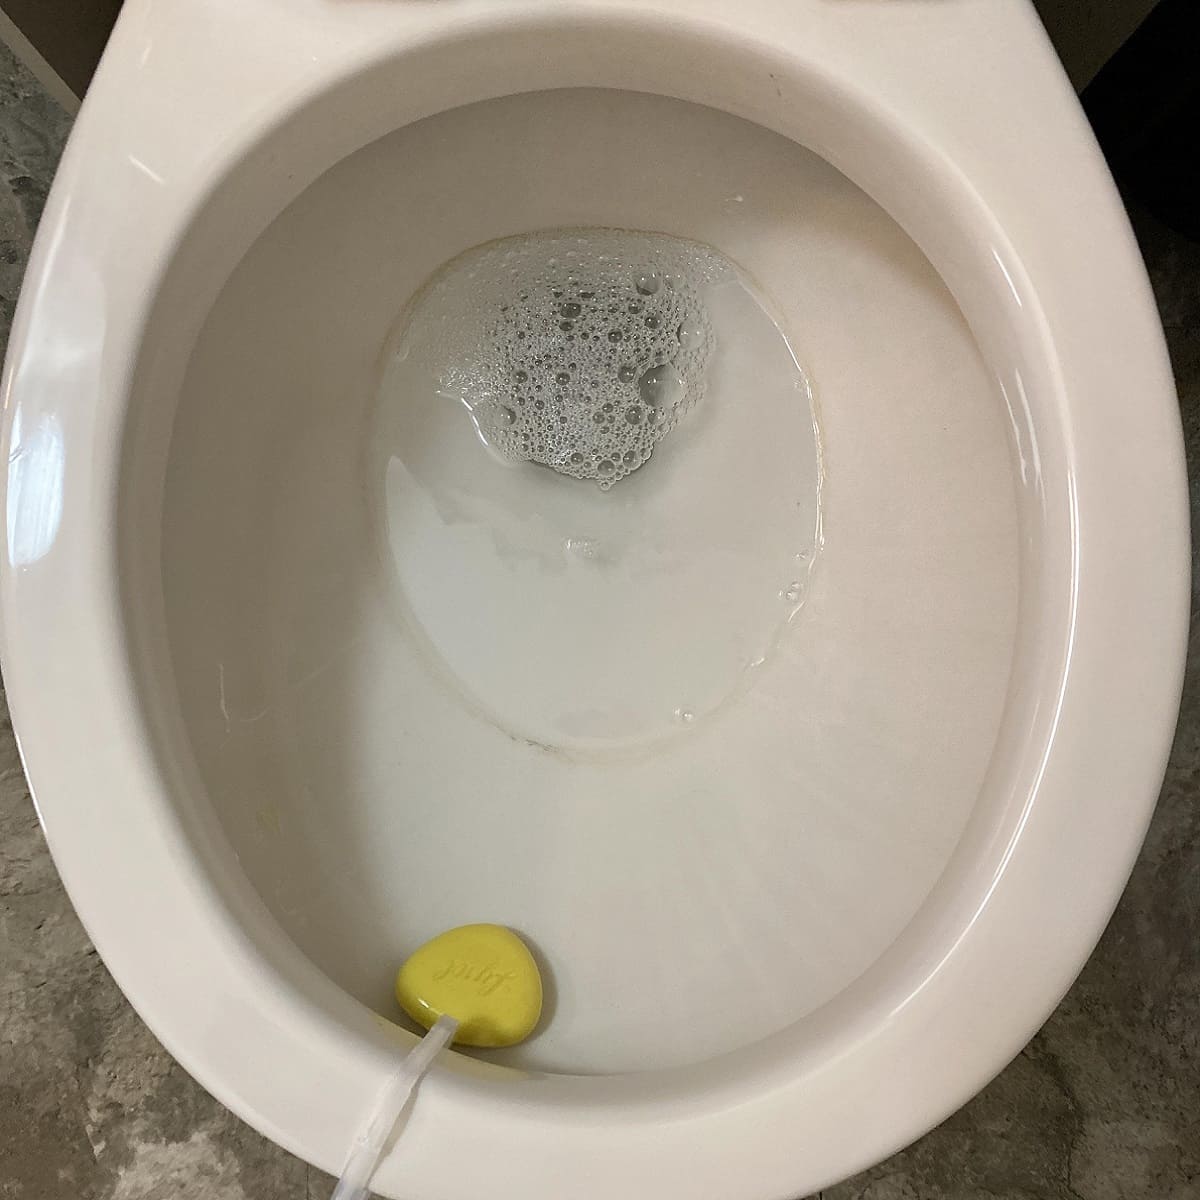 How To Install Lysol Toilet Bowl Cleaner